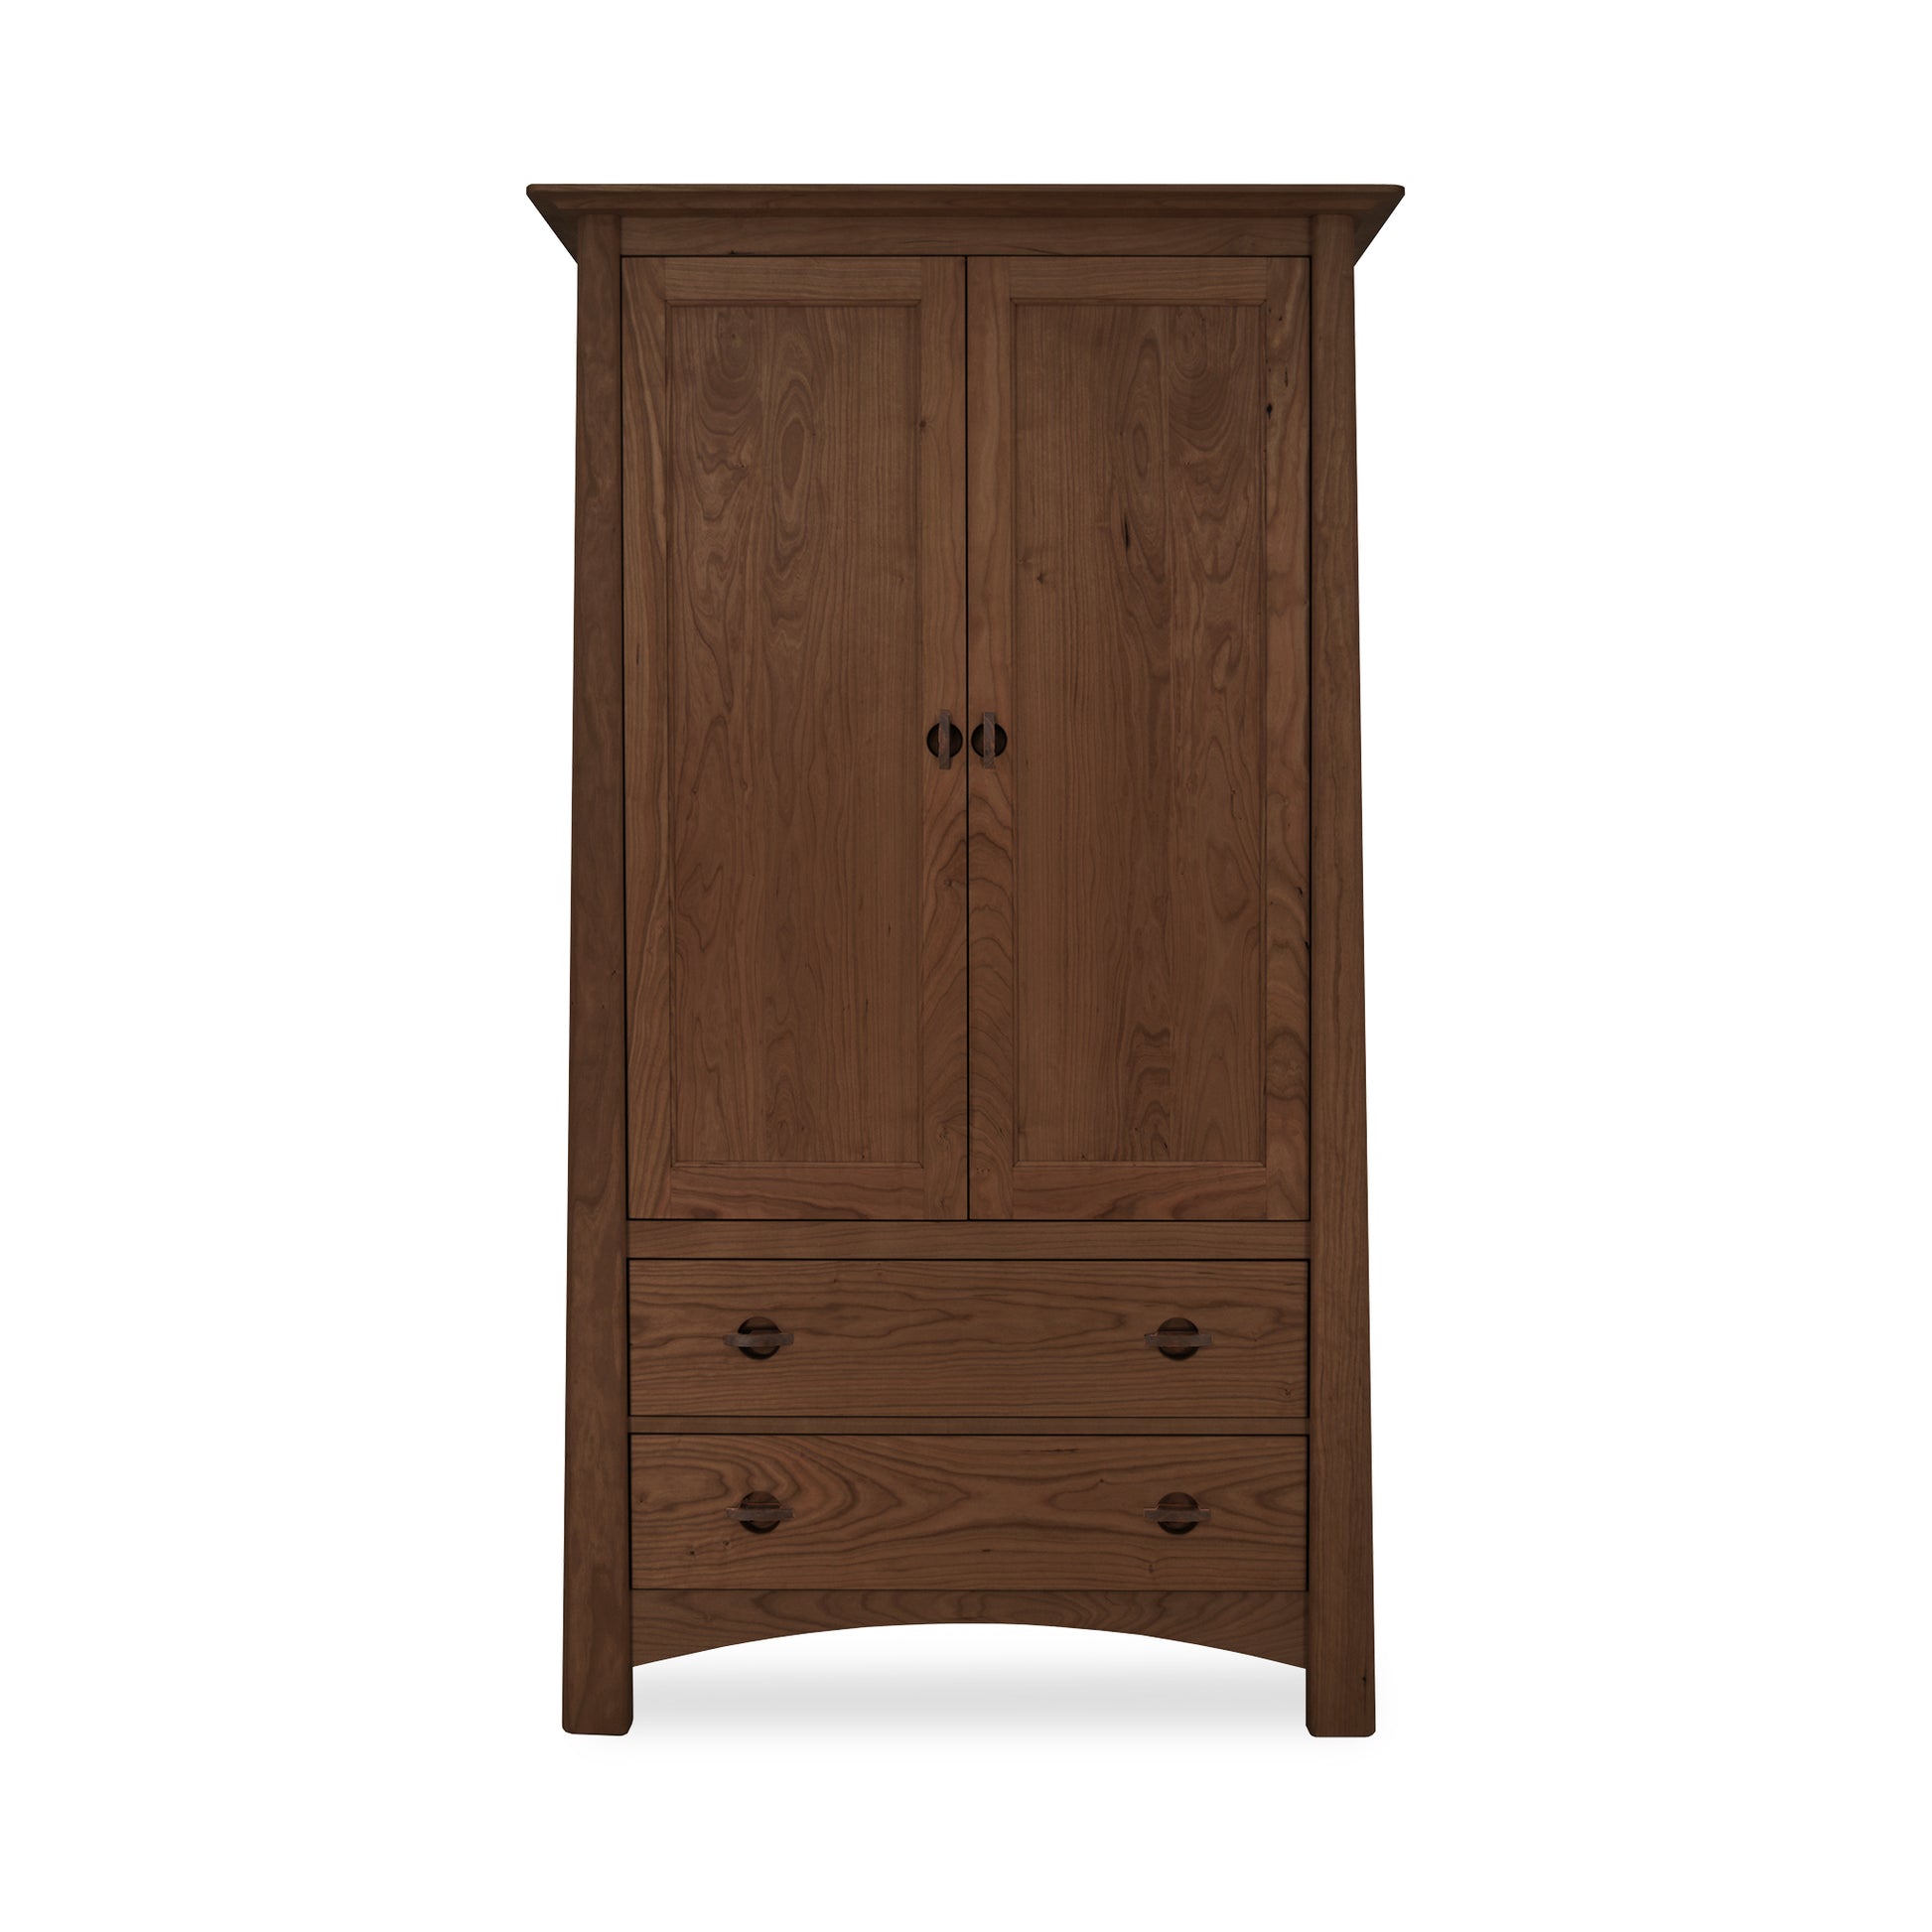 A Maple Corner Woodworks Cherry Moon Armoire with two doors and a lower drawer, isolated on a white background, showcasing Vermont craftsmanship.